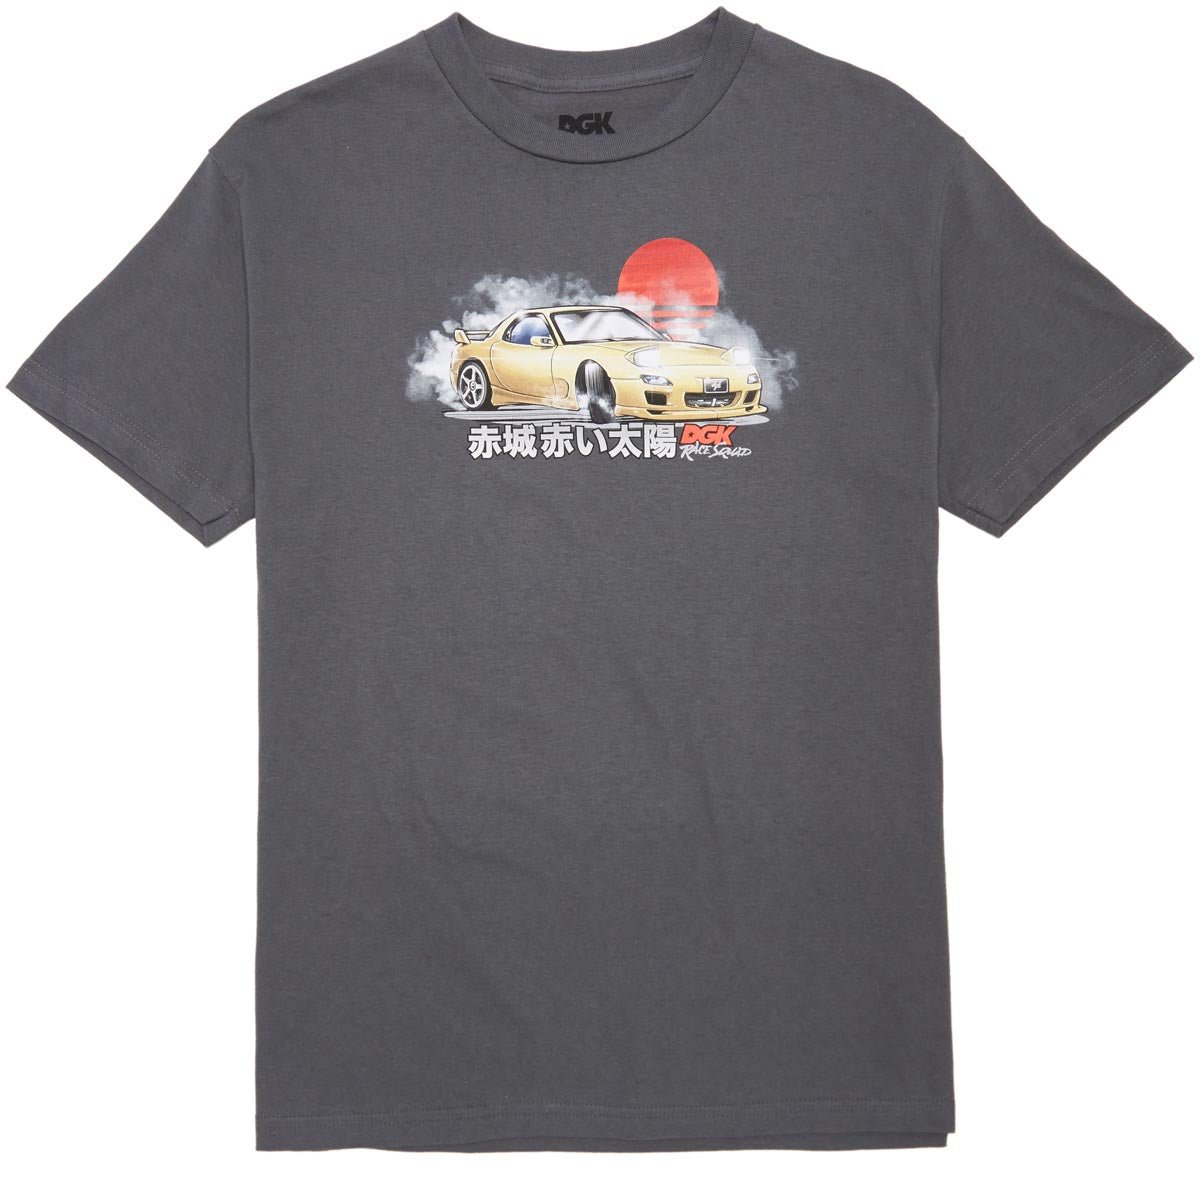 DGK Red Future T-Shirt - Charcoal image 1